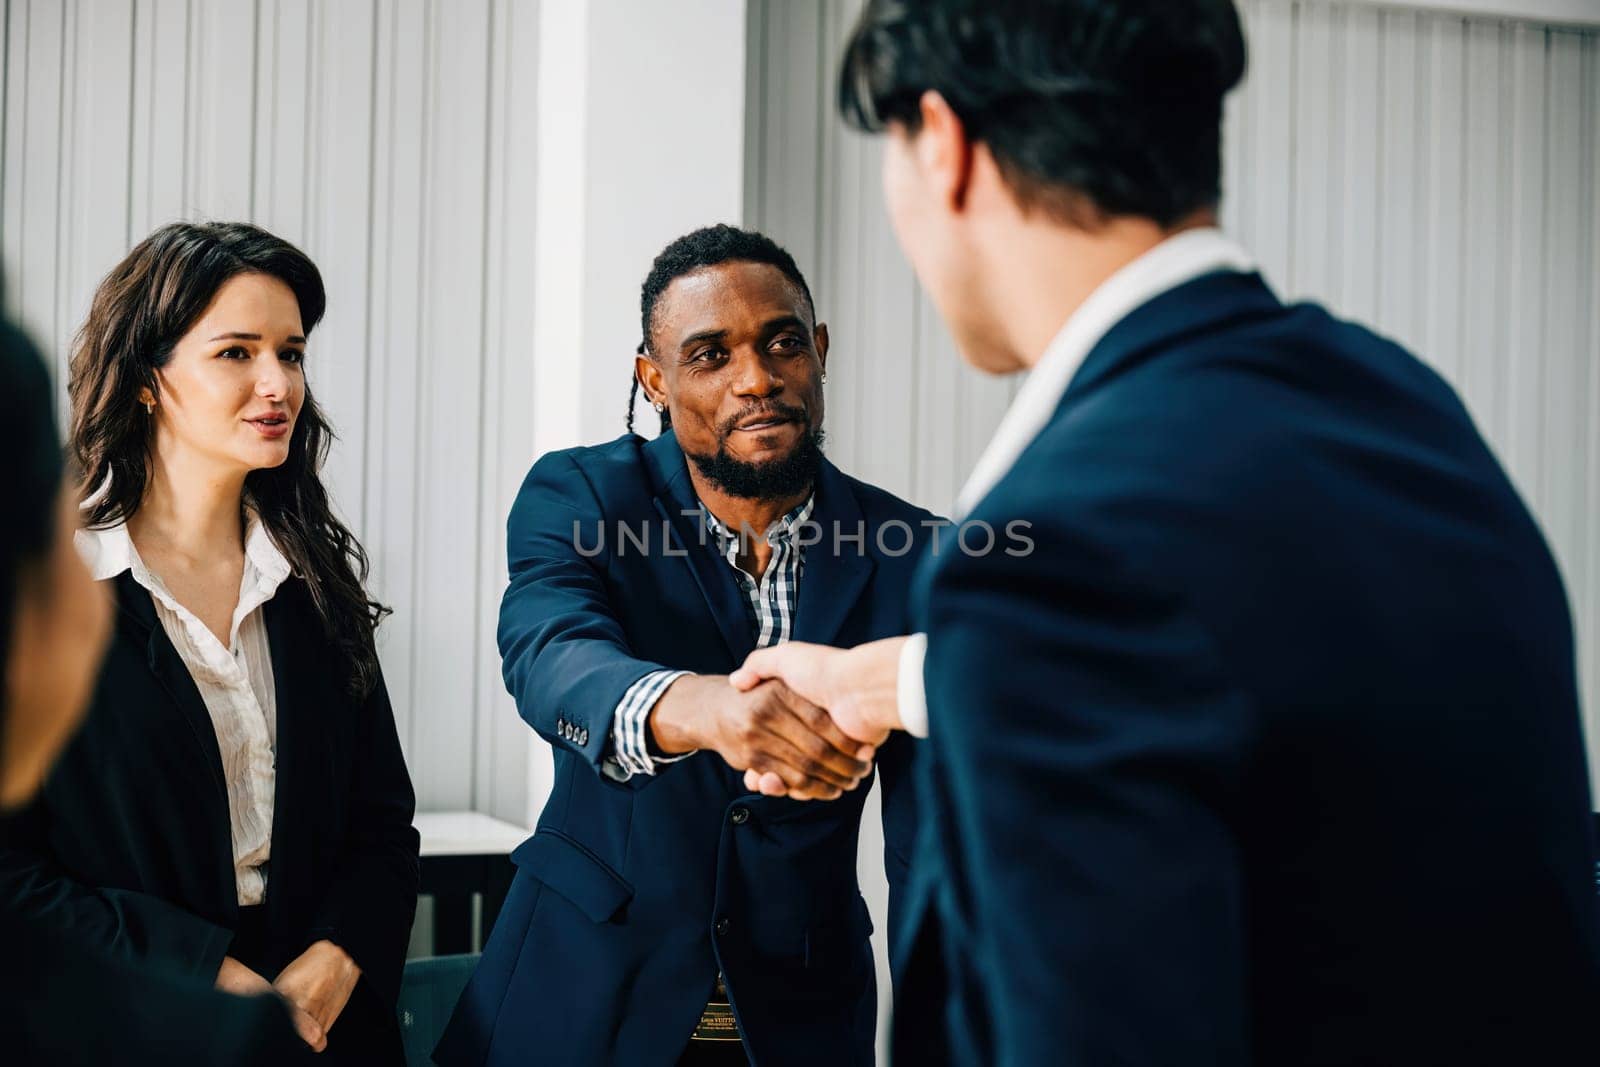 Close-up of a handshake between a young manager and a new employee, symbolizing success and collaboration in their business partnership. Men shake hands during a leadership meeting. by Sorapop